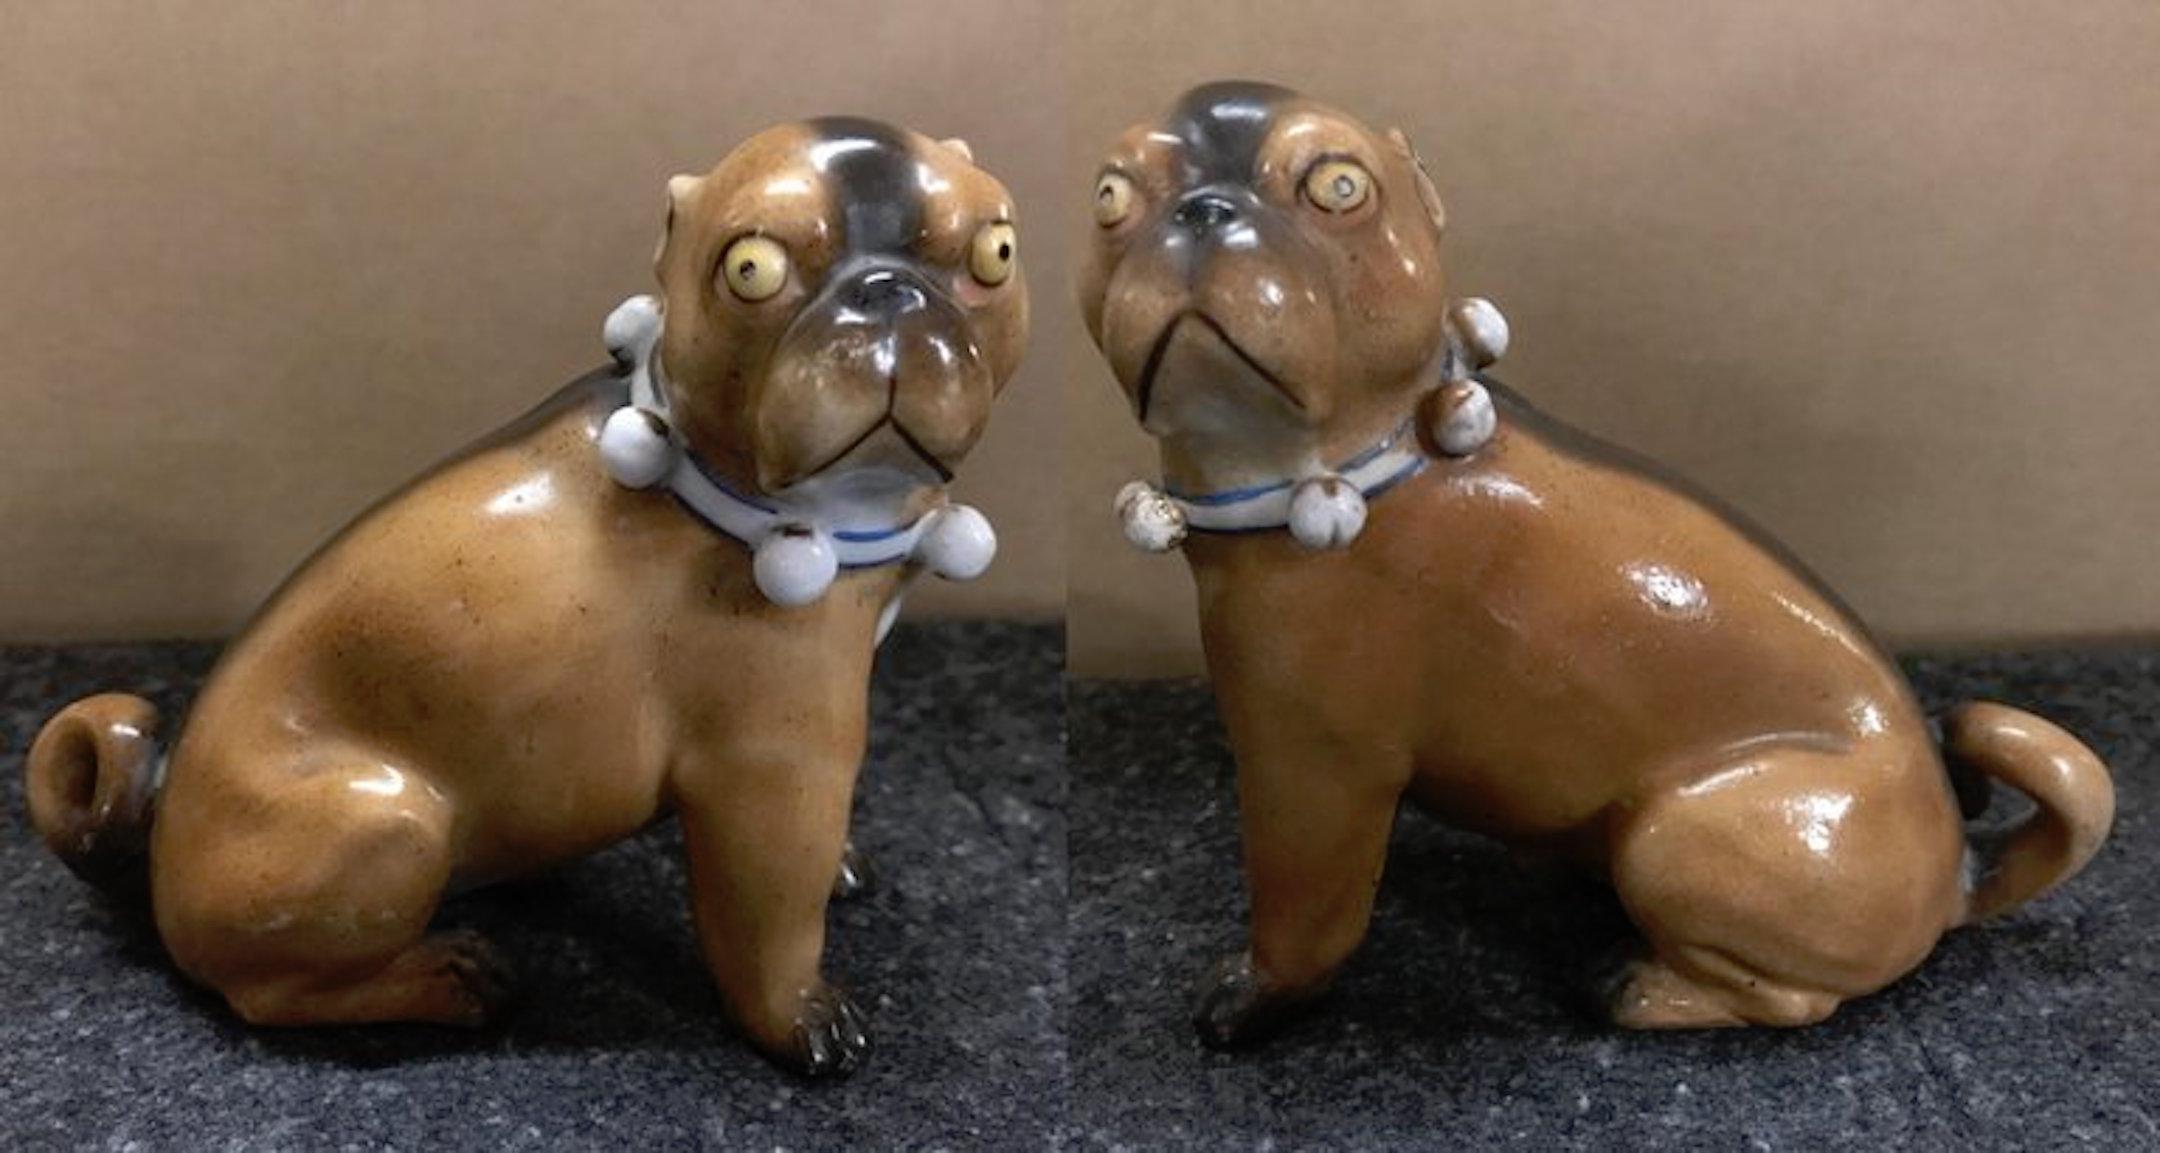 Pair of antique German porcelain pug dogs, each one with realistically modeled with a bell collar
1: 4.25” H x 4.5” W x 3.5” D
2: 4” H x 4.25” W x 2.5” D.